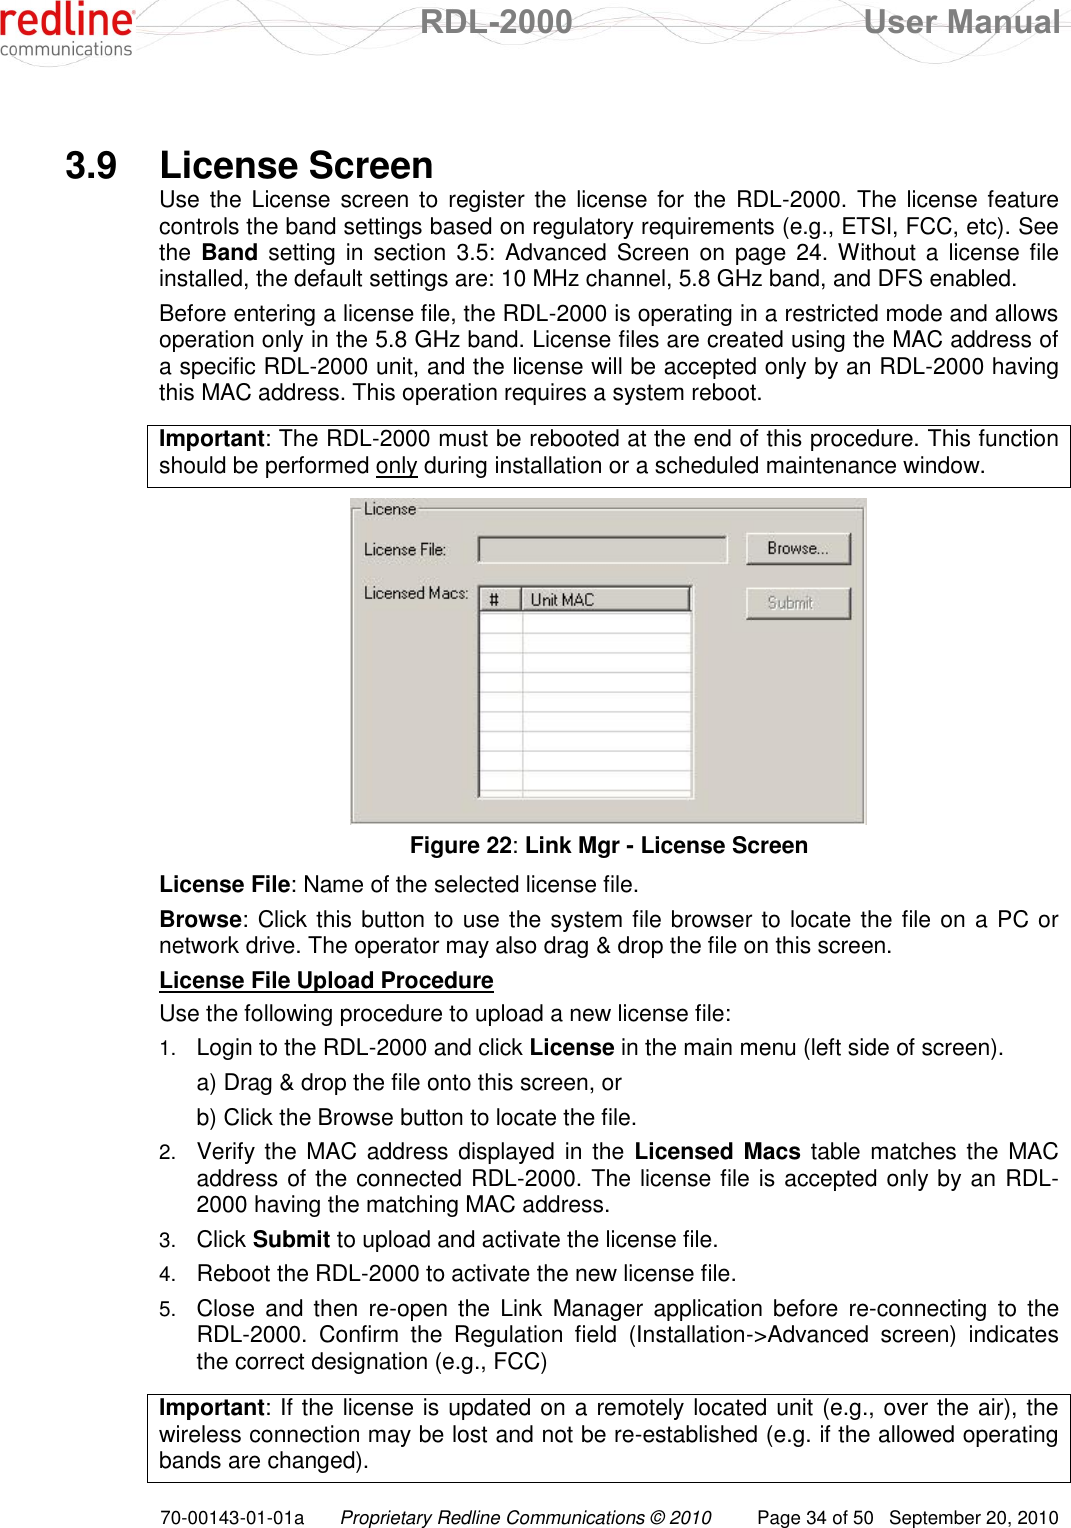  RDL-2000  User Manual 70-00143-01-01a Proprietary Redline Communications © 2010  Page 34 of 50  September 20, 2010    3.9  License Screen Use the License screen  to  register the license for the RDL-2000. The license feature controls the band settings based on regulatory requirements (e.g., ETSI, FCC, etc). See the  Band setting  in section 3.5: Advanced Screen on page 24. Without a  license  file installed, the default settings are: 10 MHz channel, 5.8 GHz band, and DFS enabled. Before entering a license file, the RDL-2000 is operating in a restricted mode and allows operation only in the 5.8 GHz band. License files are created using the MAC address of a specific RDL-2000 unit, and the license will be accepted only by an RDL-2000 having this MAC address. This operation requires a system reboot.  Important: The RDL-2000 must be rebooted at the end of this procedure. This function should be performed only during installation or a scheduled maintenance window.    Figure 22: Link Mgr - License Screen License File: Name of the selected license file.  Browse: Click this button to use the system file browser to locate the file on a PC or network drive. The operator may also drag &amp; drop the file on this screen. License File Upload Procedure Use the following procedure to upload a new license file: 1. Login to the RDL-2000 and click License in the main menu (left side of screen).   a) Drag &amp; drop the file onto this screen, or   b) Click the Browse button to locate the file. 2. Verify the  MAC address displayed  in the Licensed Macs table matches the  MAC address of the connected RDL-2000. The license file is accepted only by an RDL-2000 having the matching MAC address. 3. Click Submit to upload and activate the license file. 4. Reboot the RDL-2000 to activate the new license file. 5. Close  and  then  re-open  the  Link  Manager  application  before  re-connecting to  the RDL-2000.  Confirm  the  Regulation  field  (Installation-&gt;Advanced  screen)  indicates the correct designation (e.g., FCC)   Important: If the license is updated on a remotely located unit (e.g., over the air), the wireless connection may be lost and not be re-established (e.g. if the allowed operating bands are changed). 